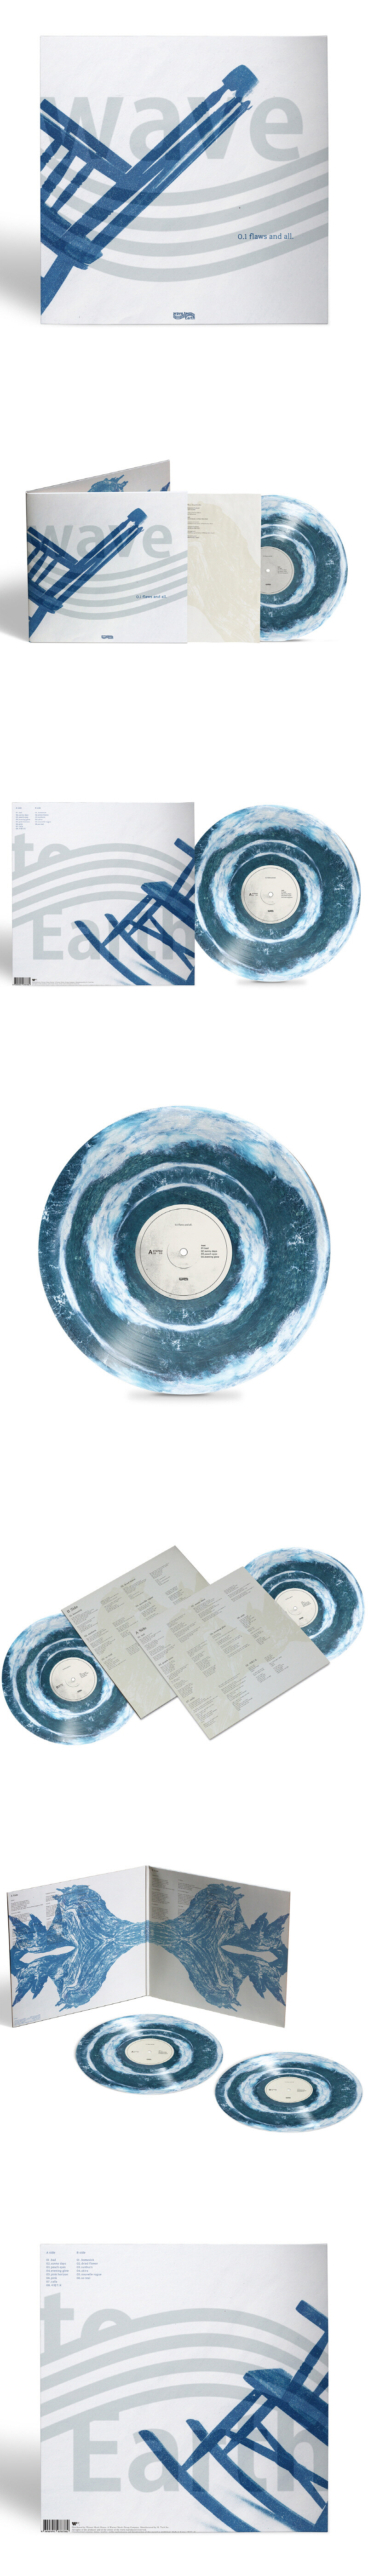 limited wave to earth blue vinyl｜TikTok Search